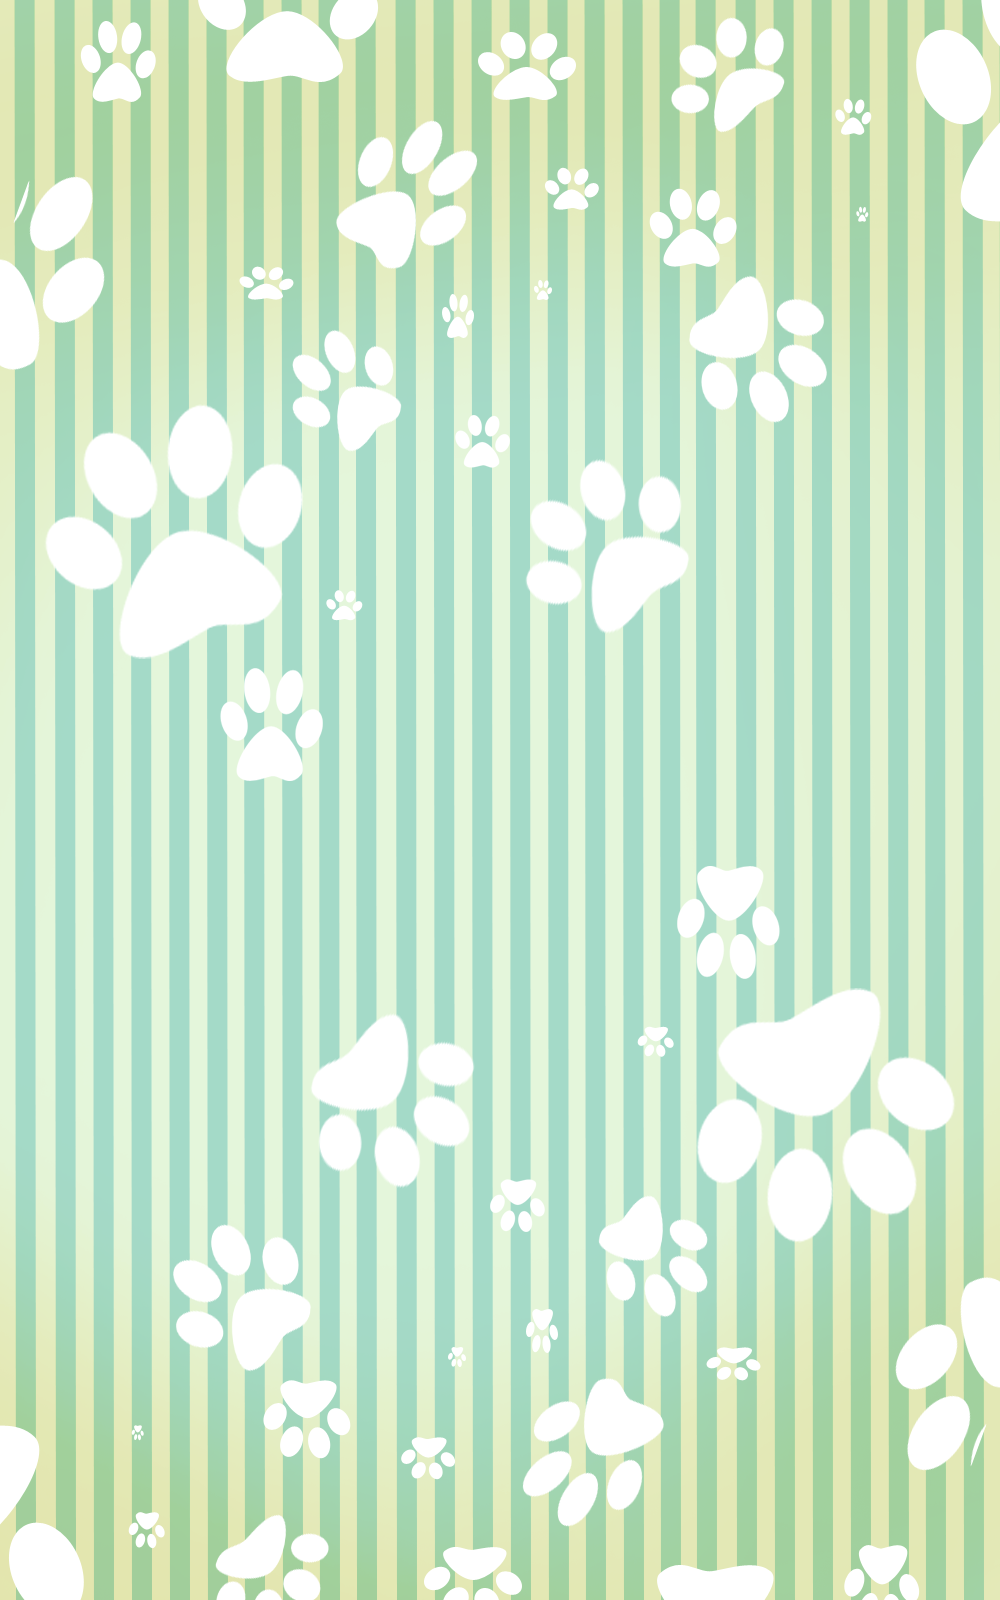 Paws Pattern By Elleoooo Resources Stock Image Designs Patterns Other